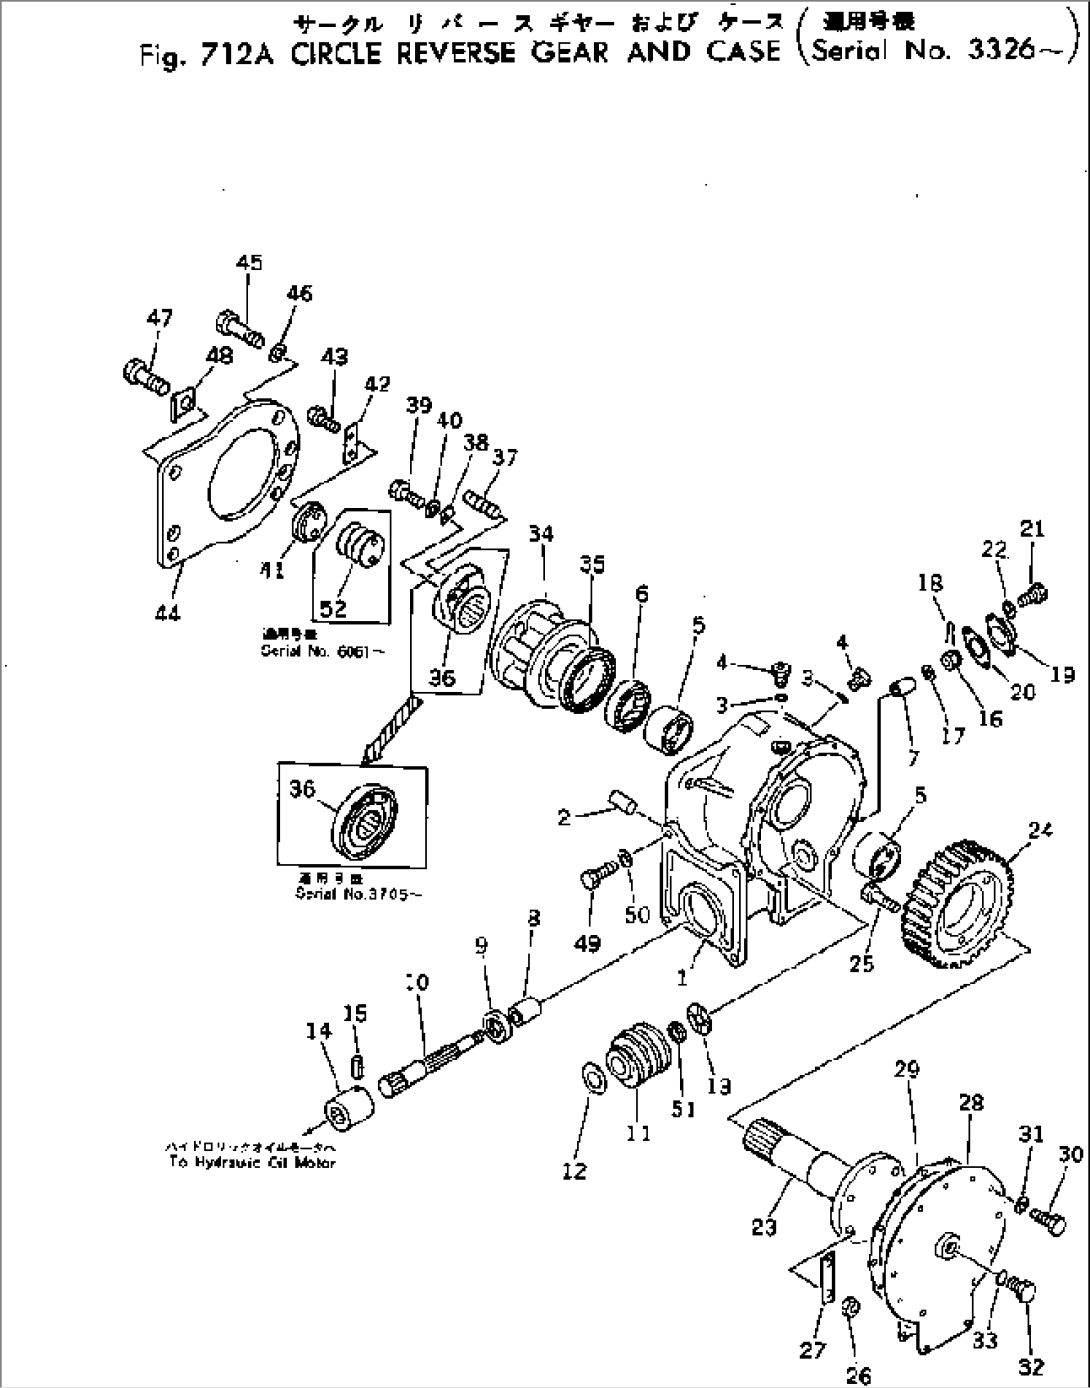 CIRCLE REVERSE GEAR AND CASE(#3326-)